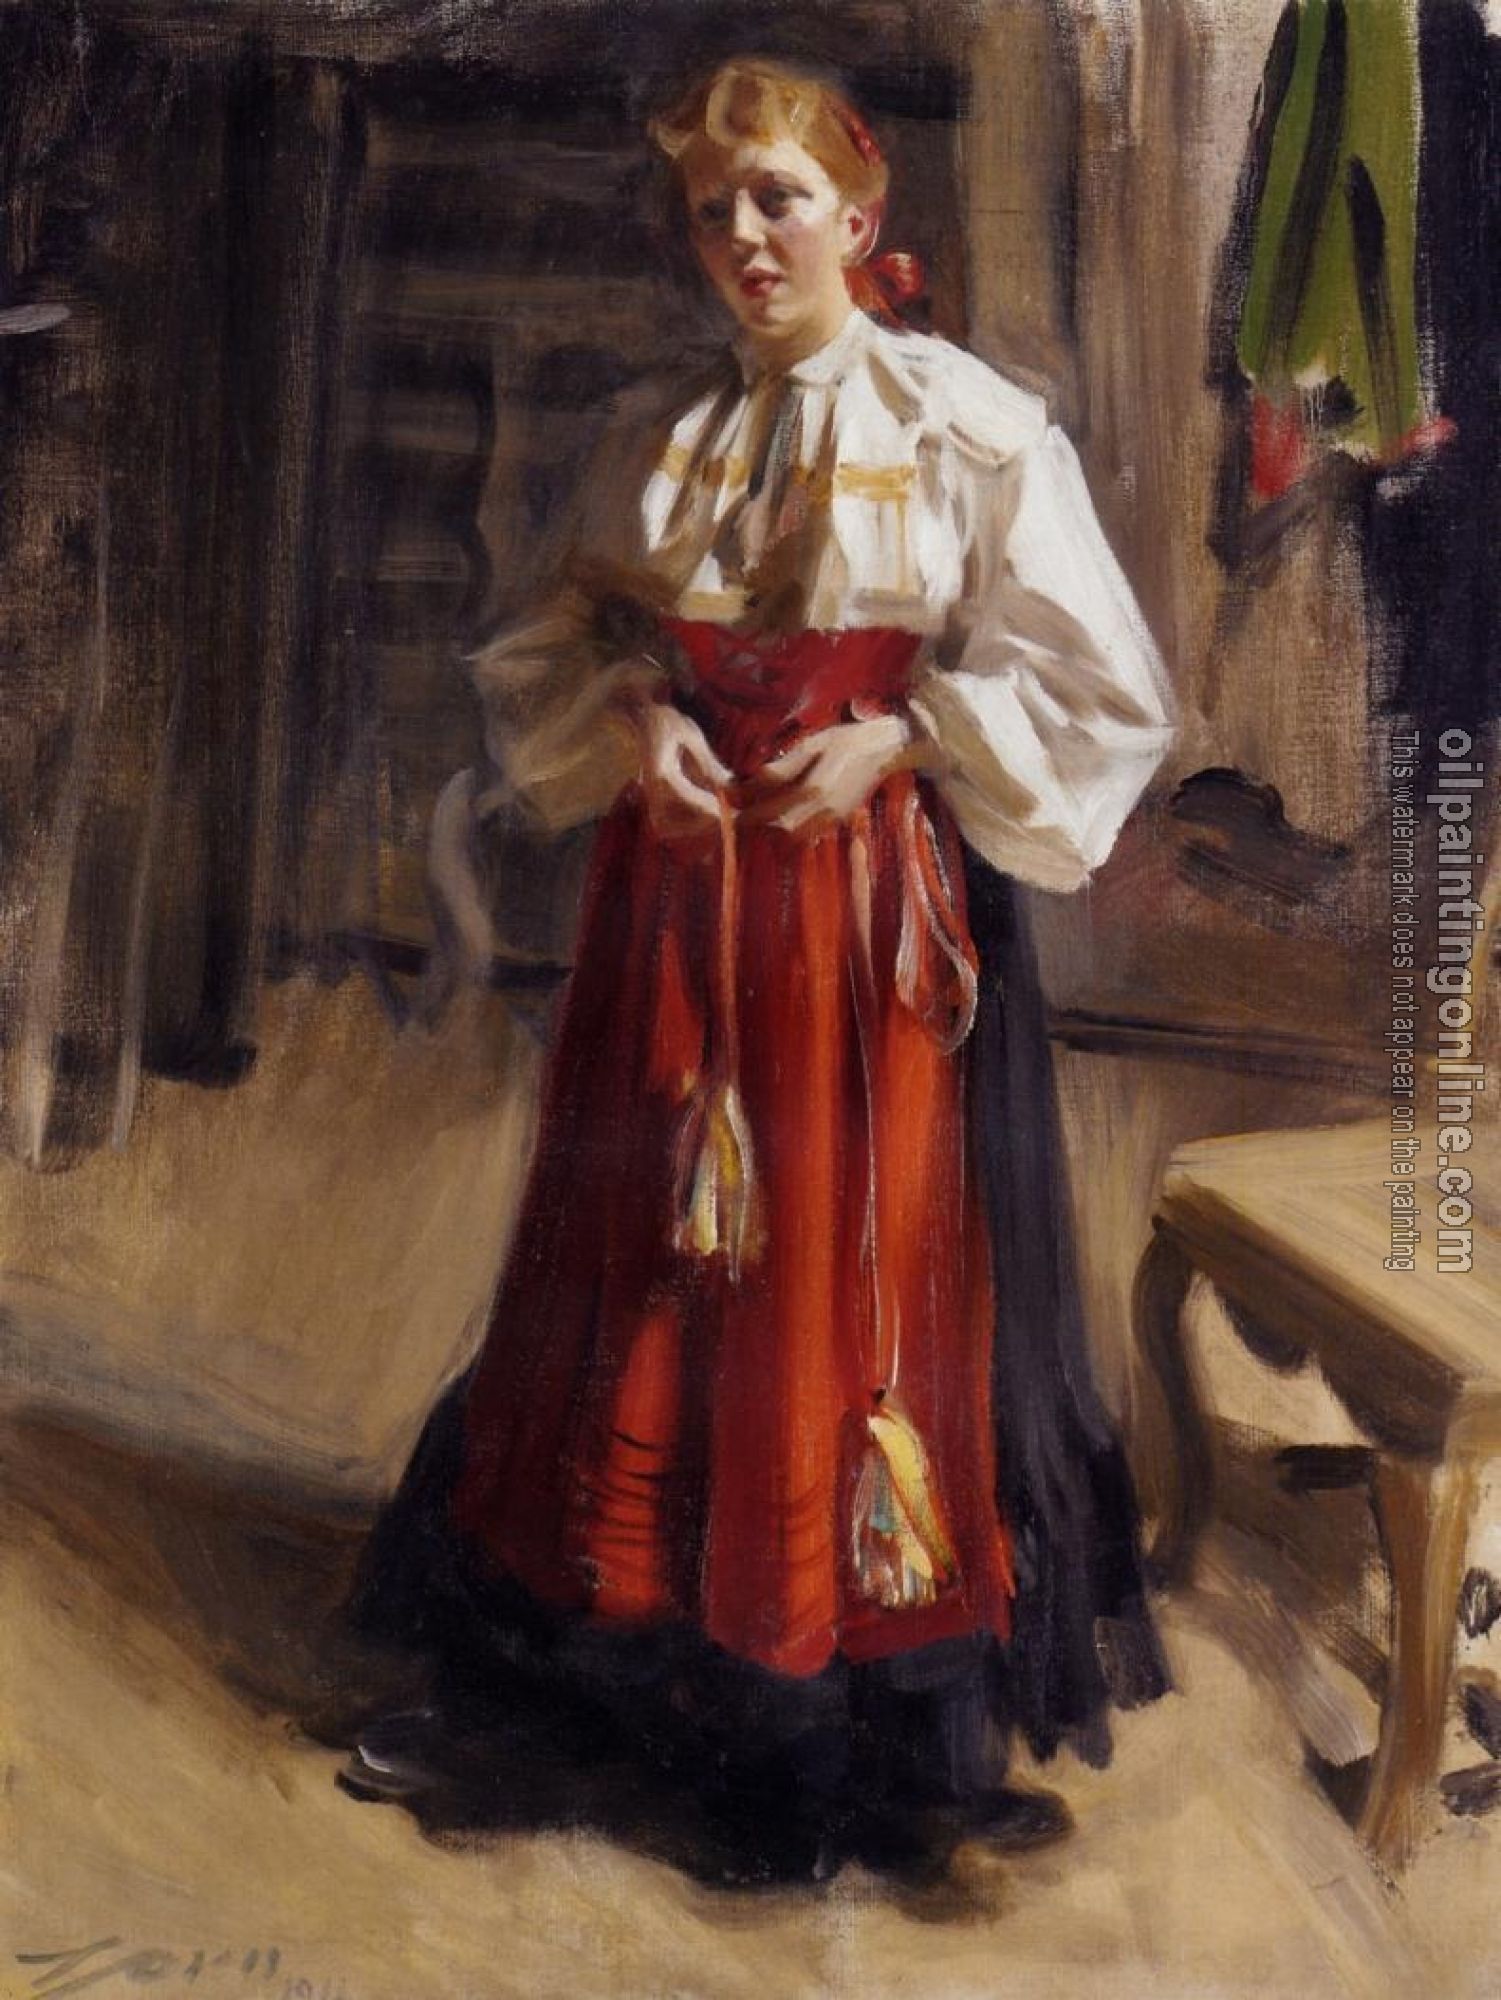 Zorn, Anders - Girl in an Orsa Costume